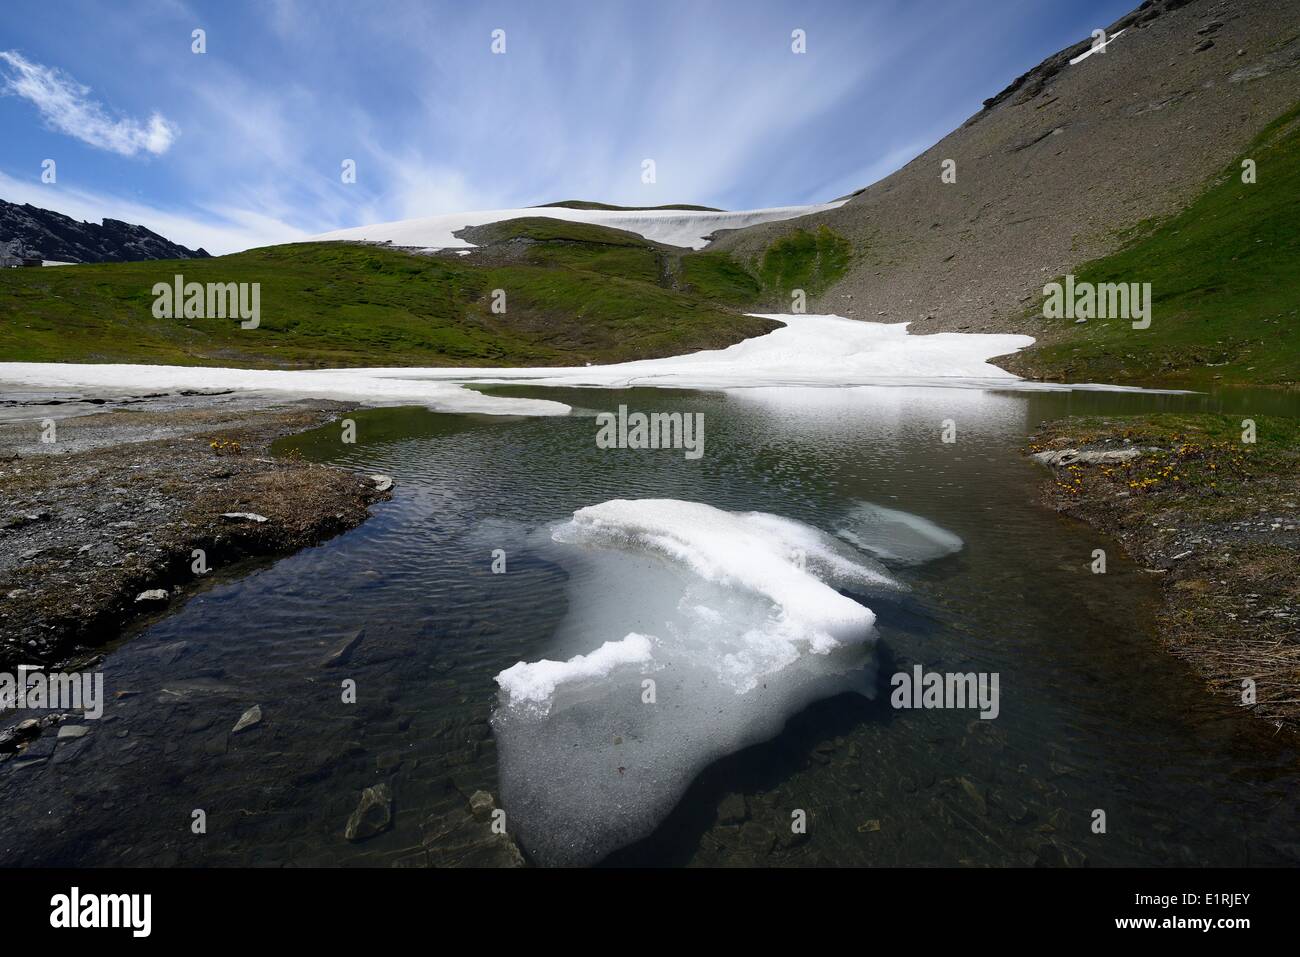 Mountain lake with melting ice floating in the water Stock Photo